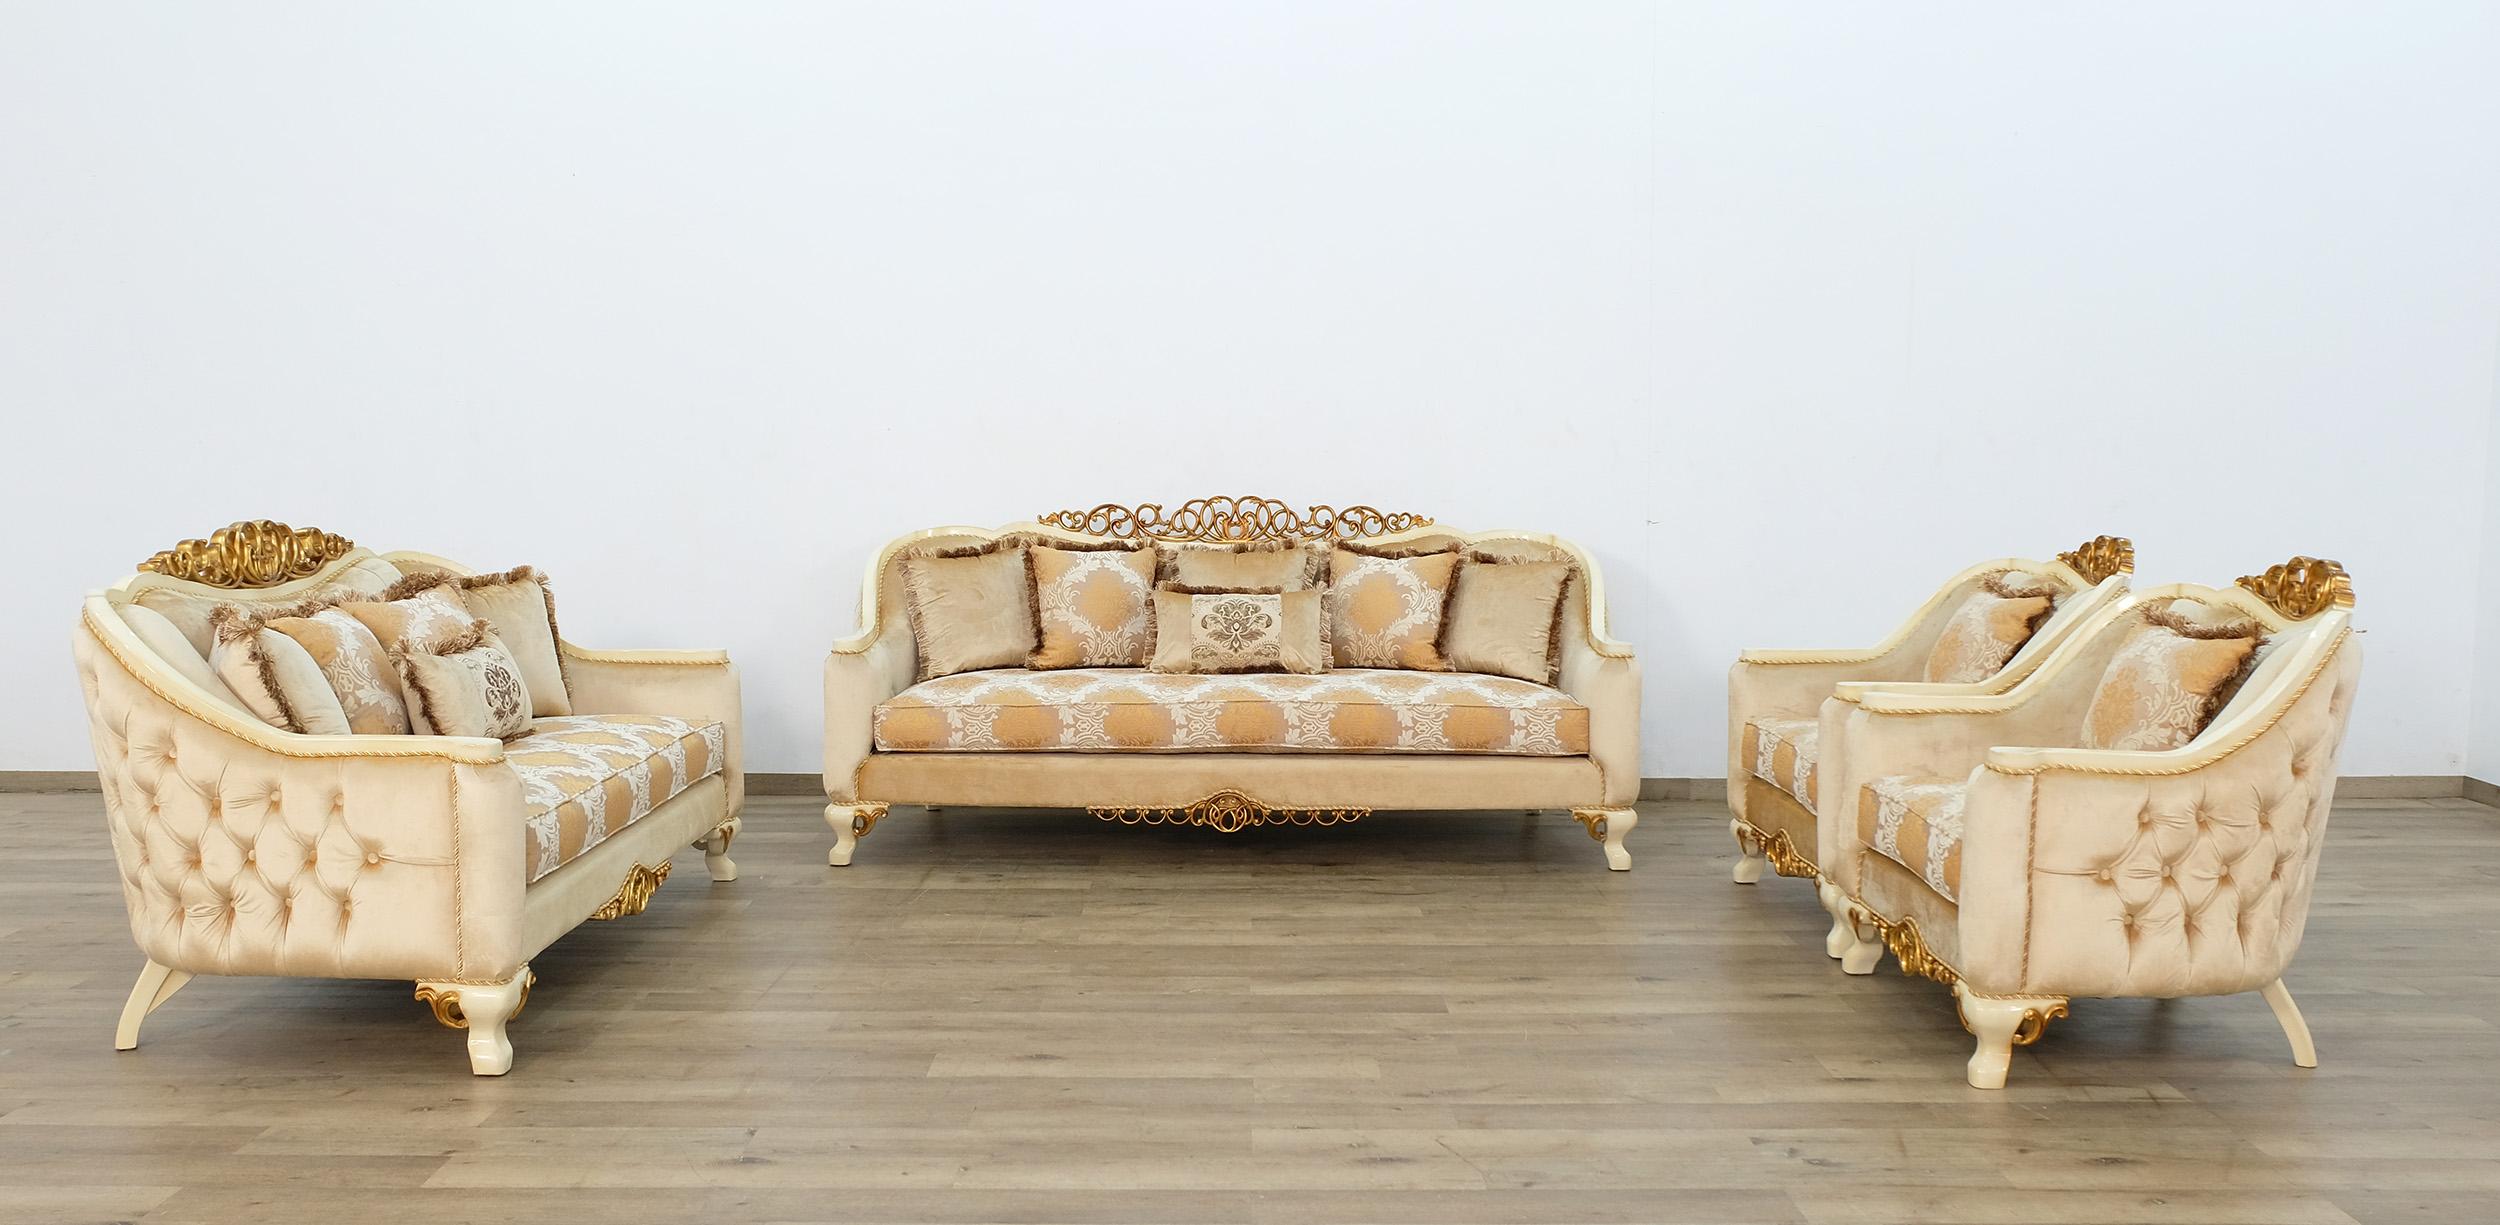 Classic, Traditional Sofa Set ANGELICA 45352-Set-4 in Antique, Gold, Brown, Beige Fabric